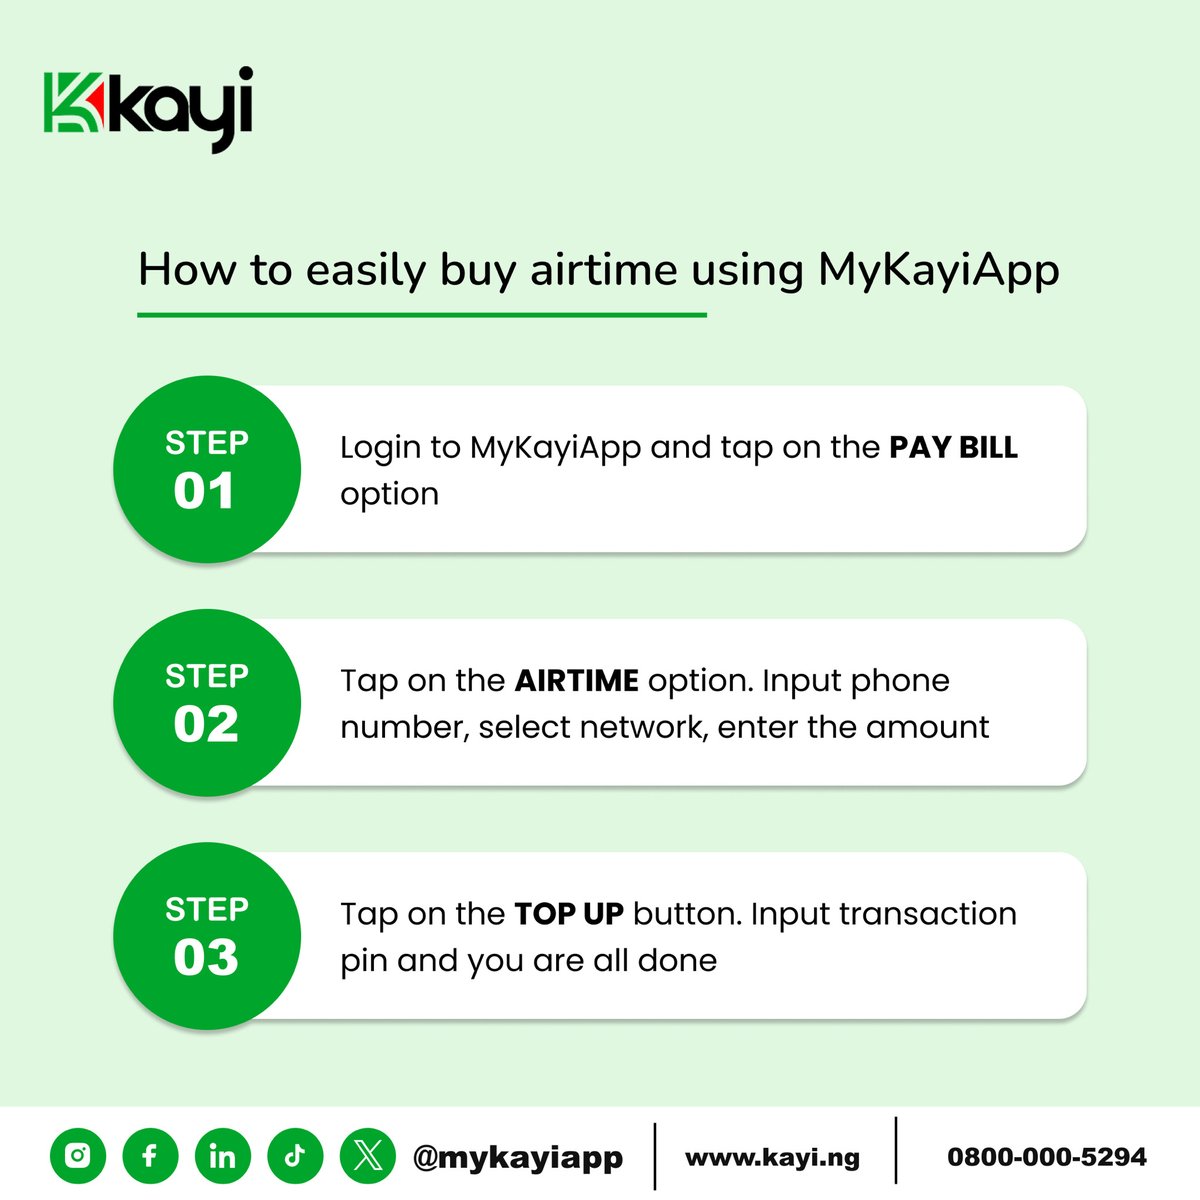 Unlock the future of banking with AI-driven convenience! With Kayiapp, topping up airtime for yourself, friends and family is as easy as 1-2-3. Follow these simple steps to experience seamless transactions like never before.
#MyKayiapp #AIDrivenBanking 
#Kayiway
#Digitalbanking